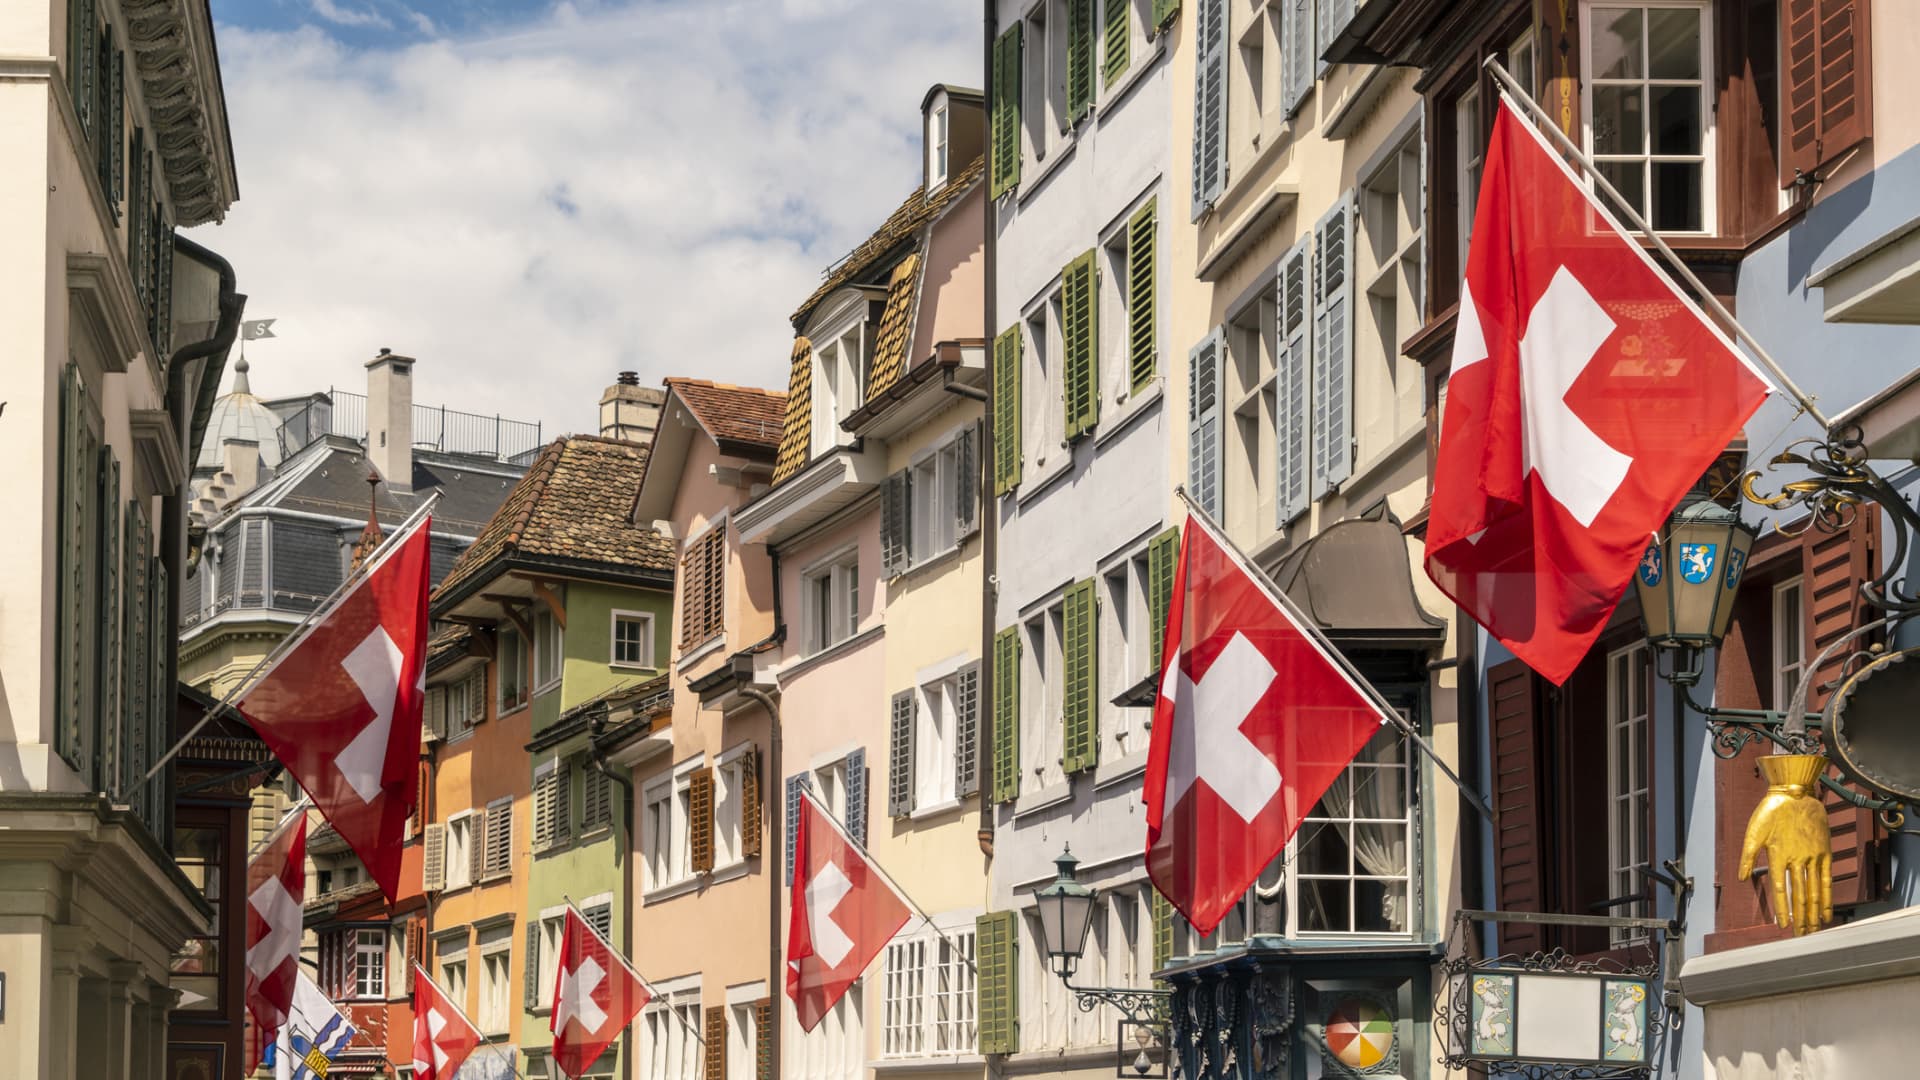 Swiss flags on houses along a street in Zug, Switzerland.